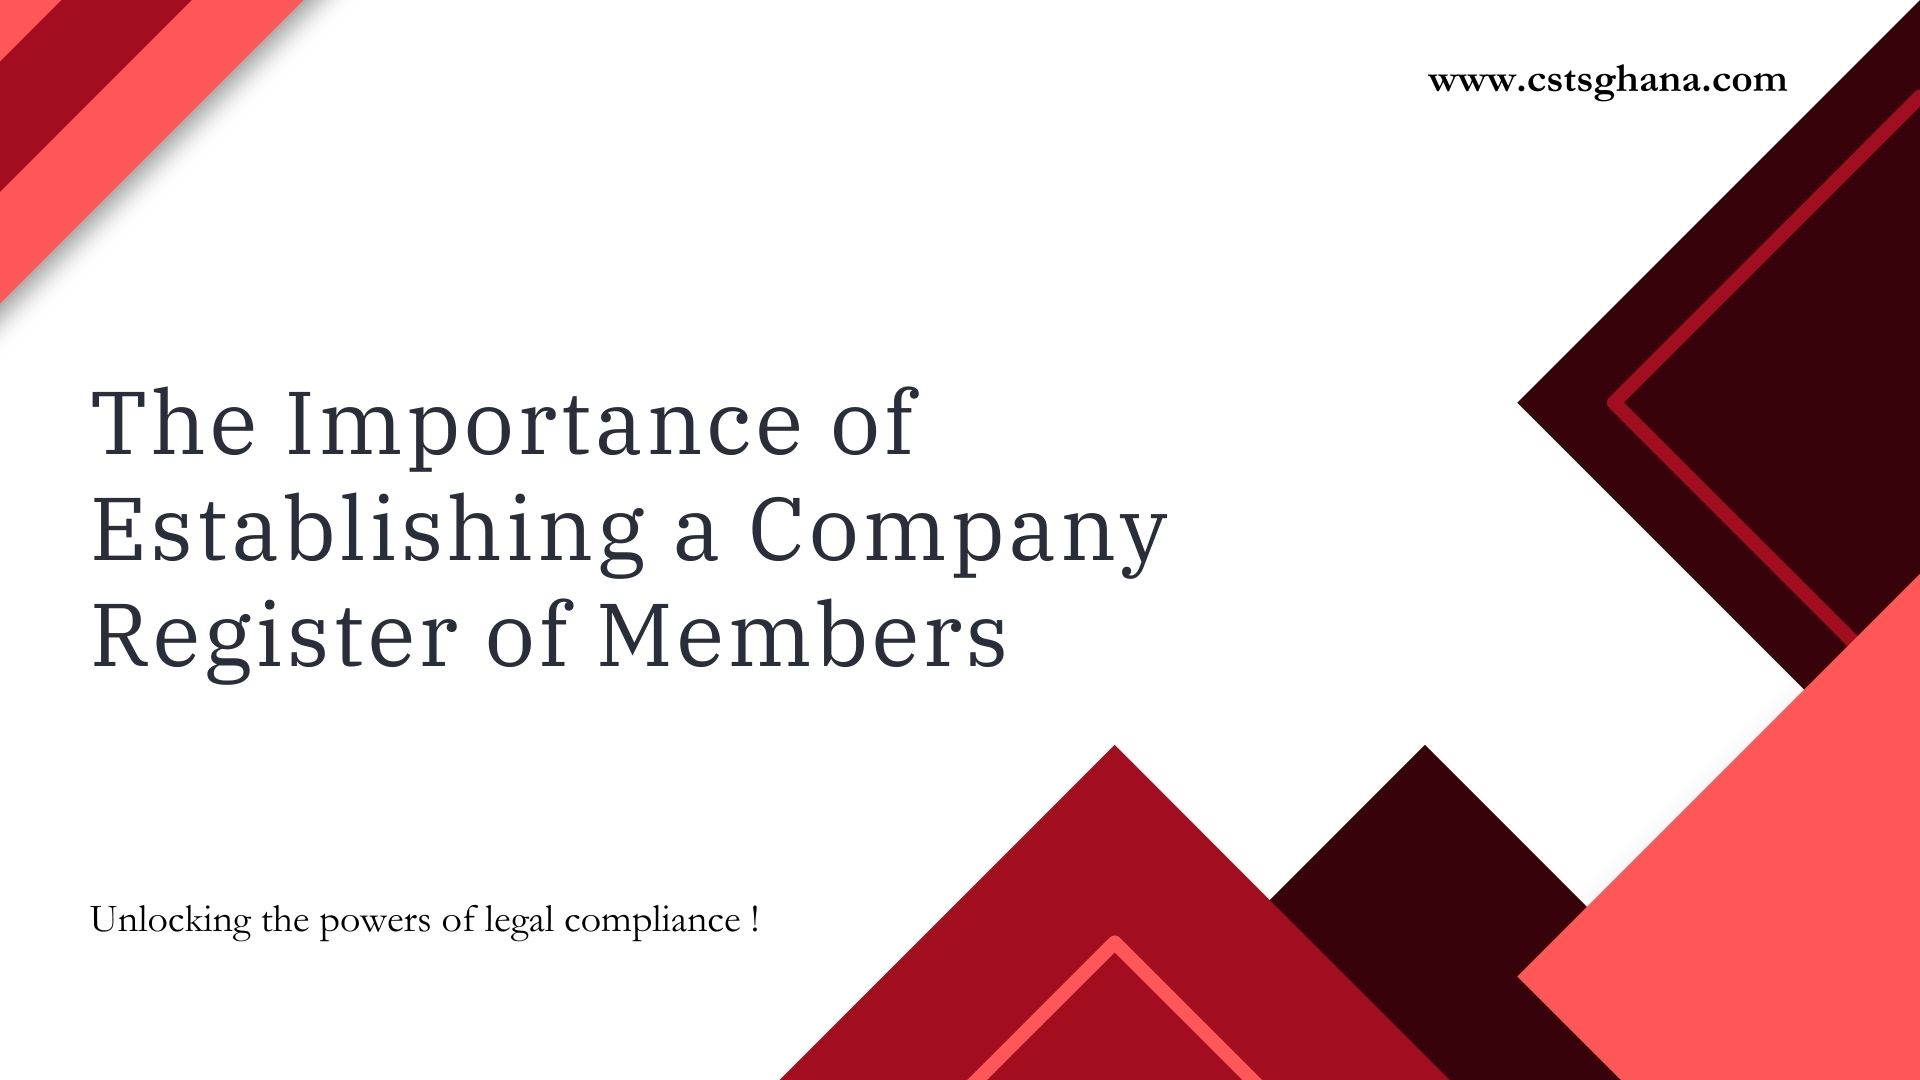 The importance of establishing a Company Register of Members